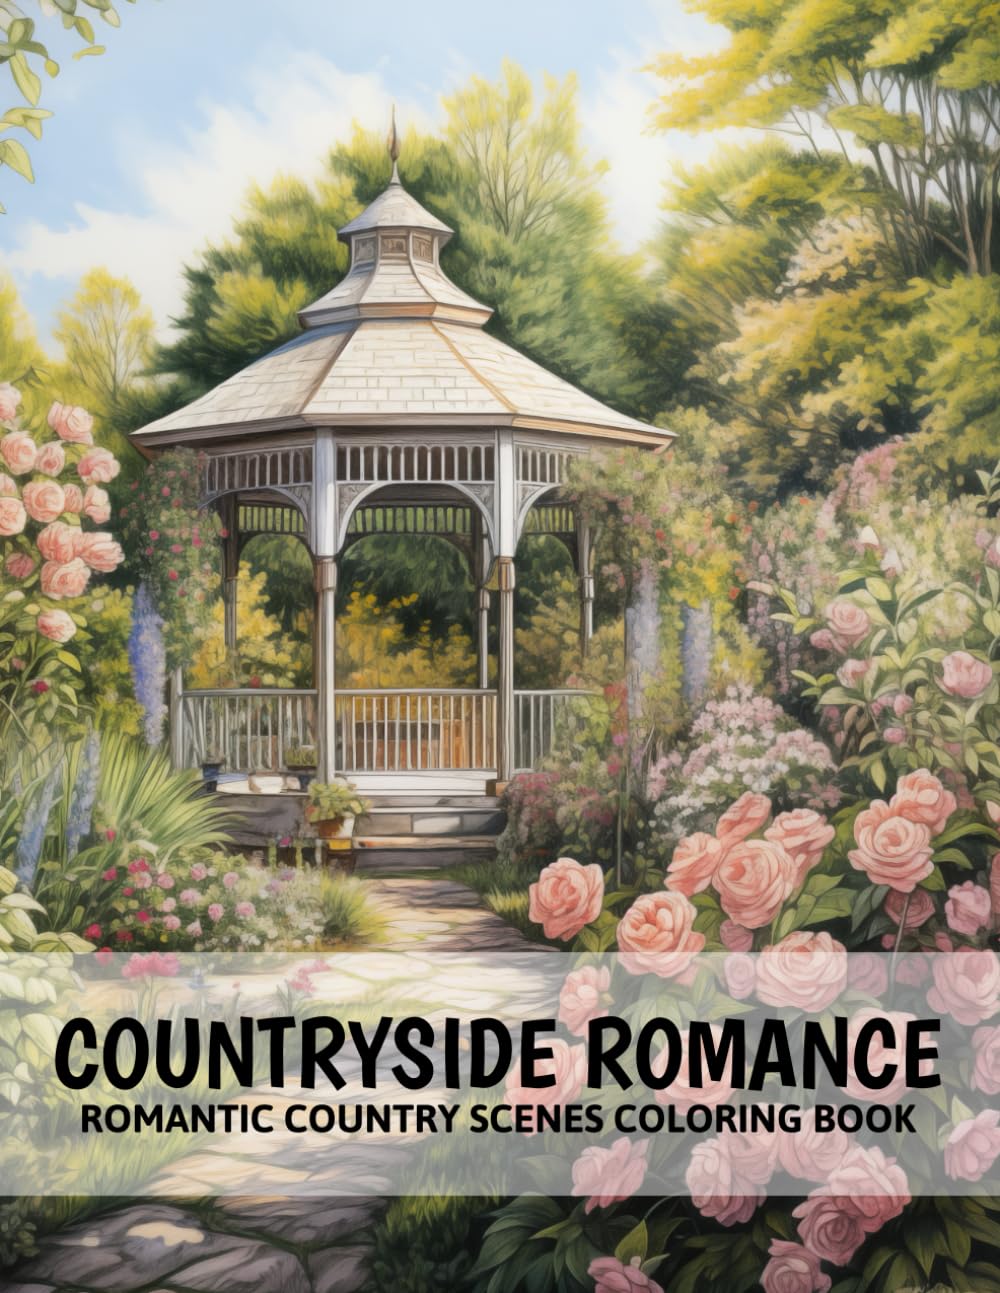 Countryside Romance Coloring Book